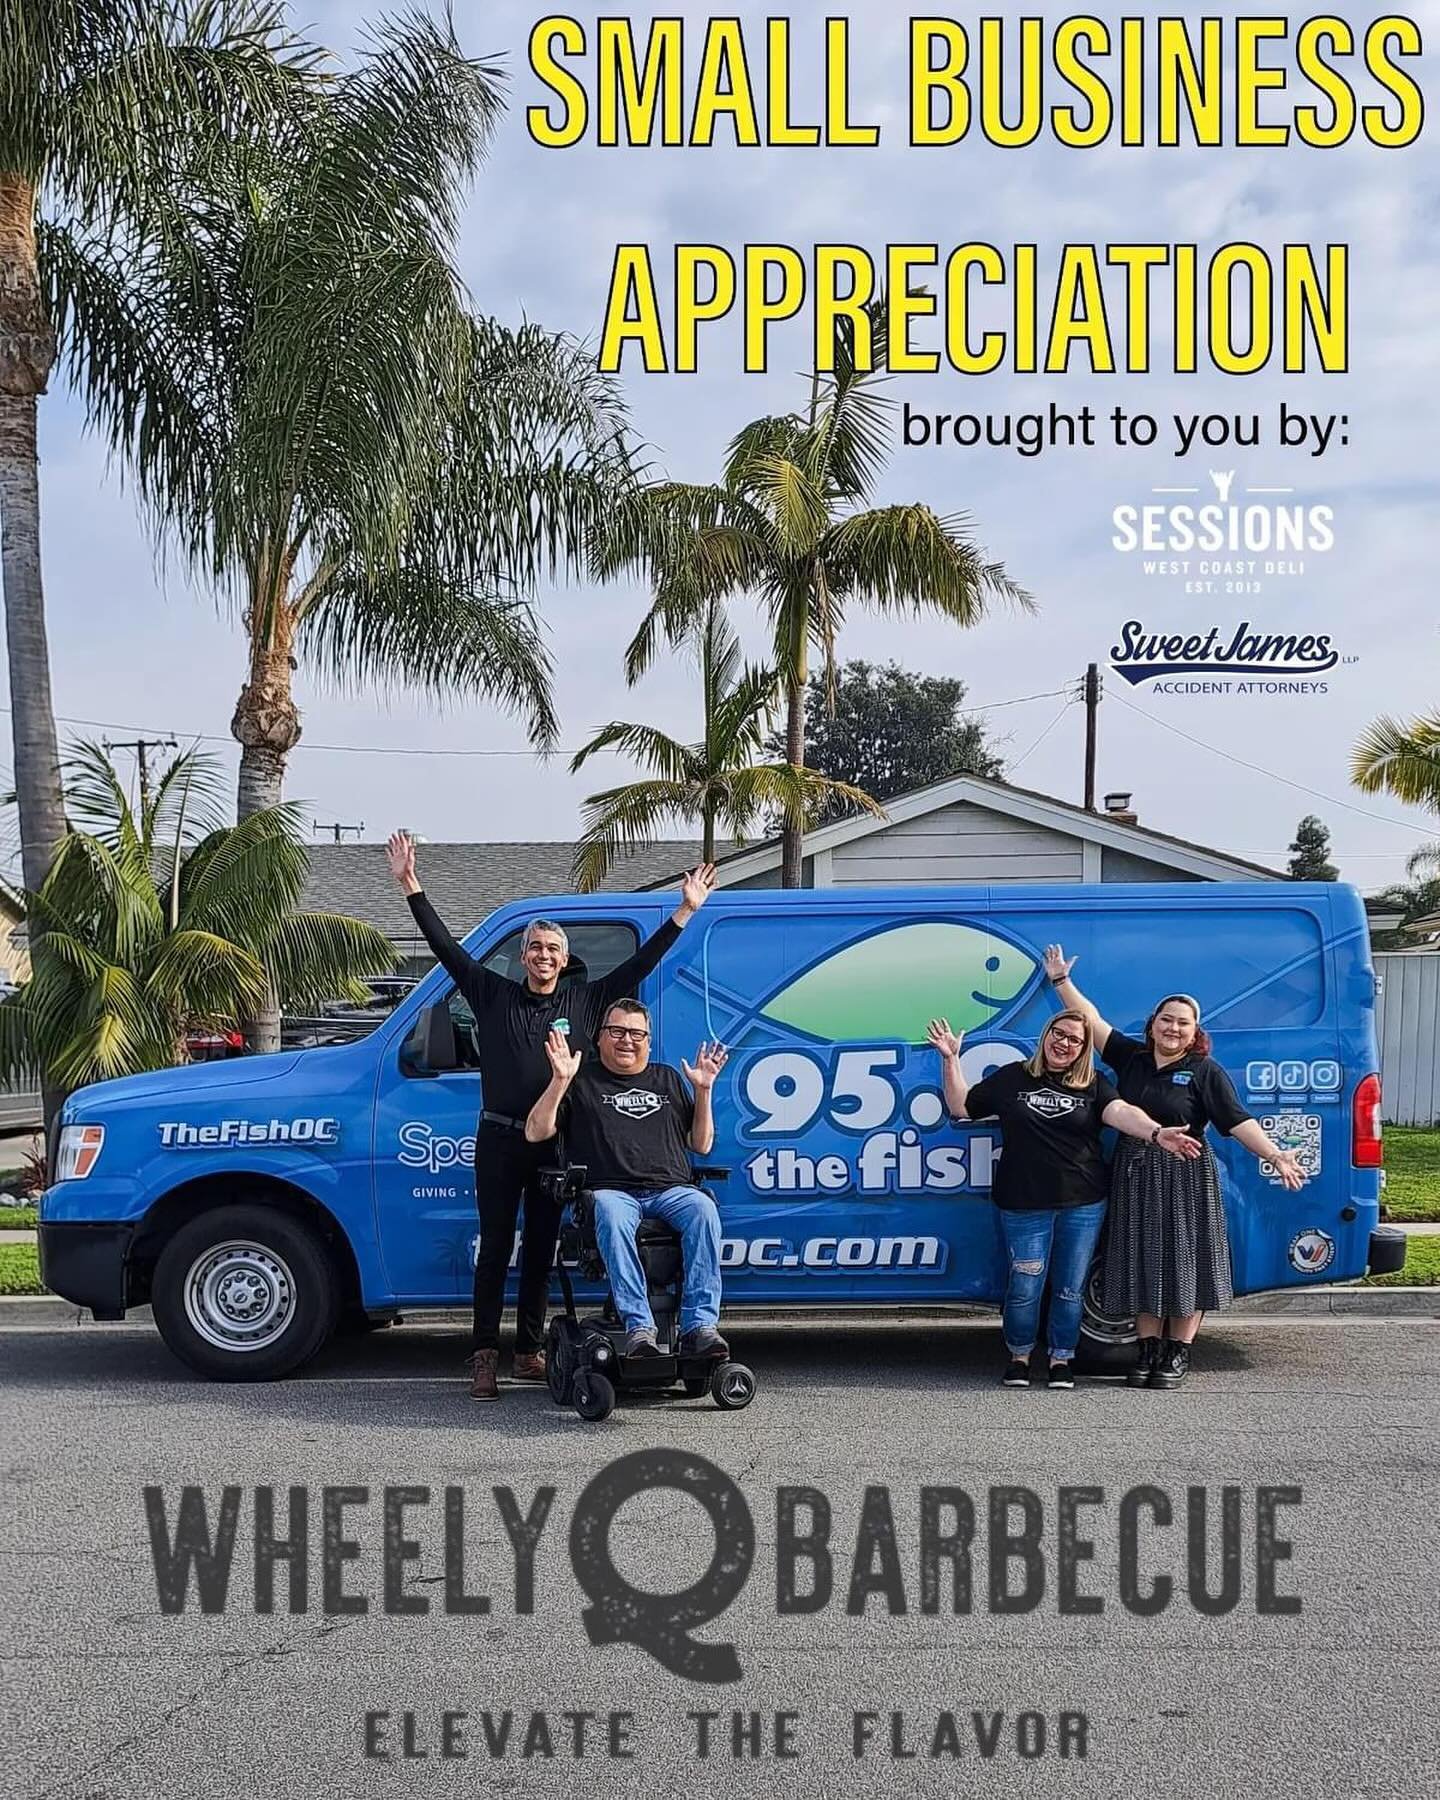 We had the opportunity of being interviewed by The Fish 95.9 last week.  We feel honored that they chose WheelyQ as a local Small Business to highlight.  Even more people will get to know about our delicious products and we get a chance to raise awar